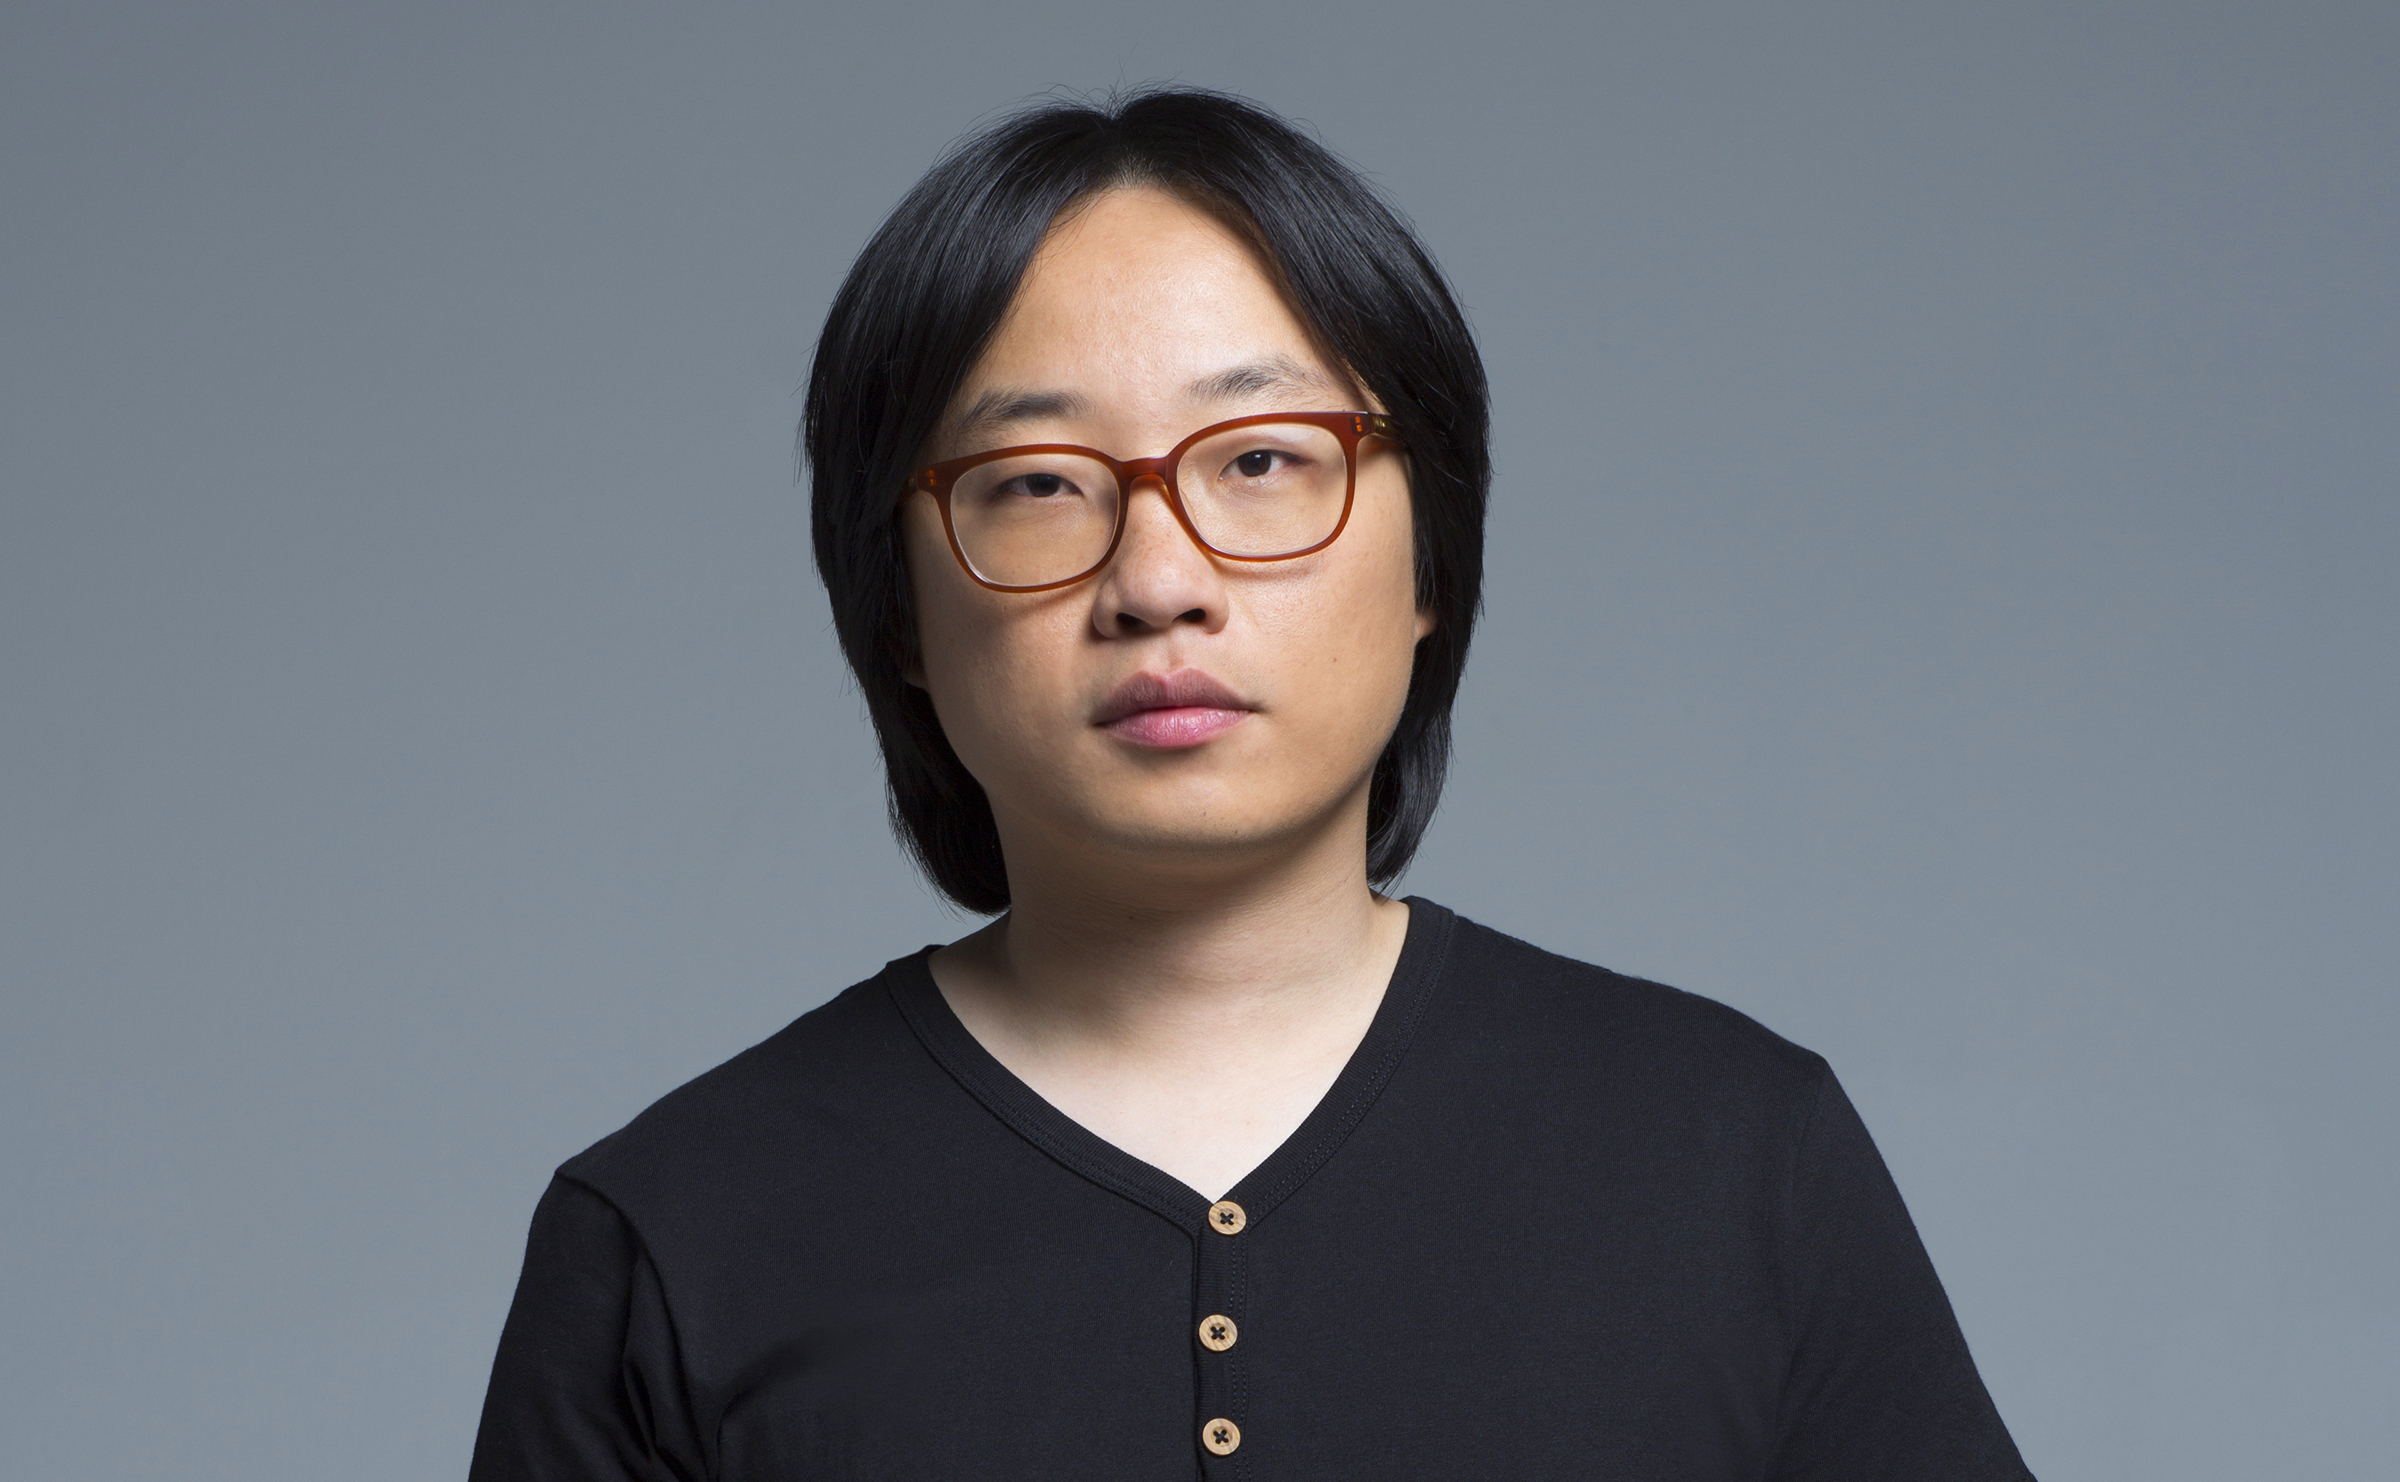 FLOOD - Parents, Assimilation, and BET: Jimmy O. Yang Wrote the Book on It